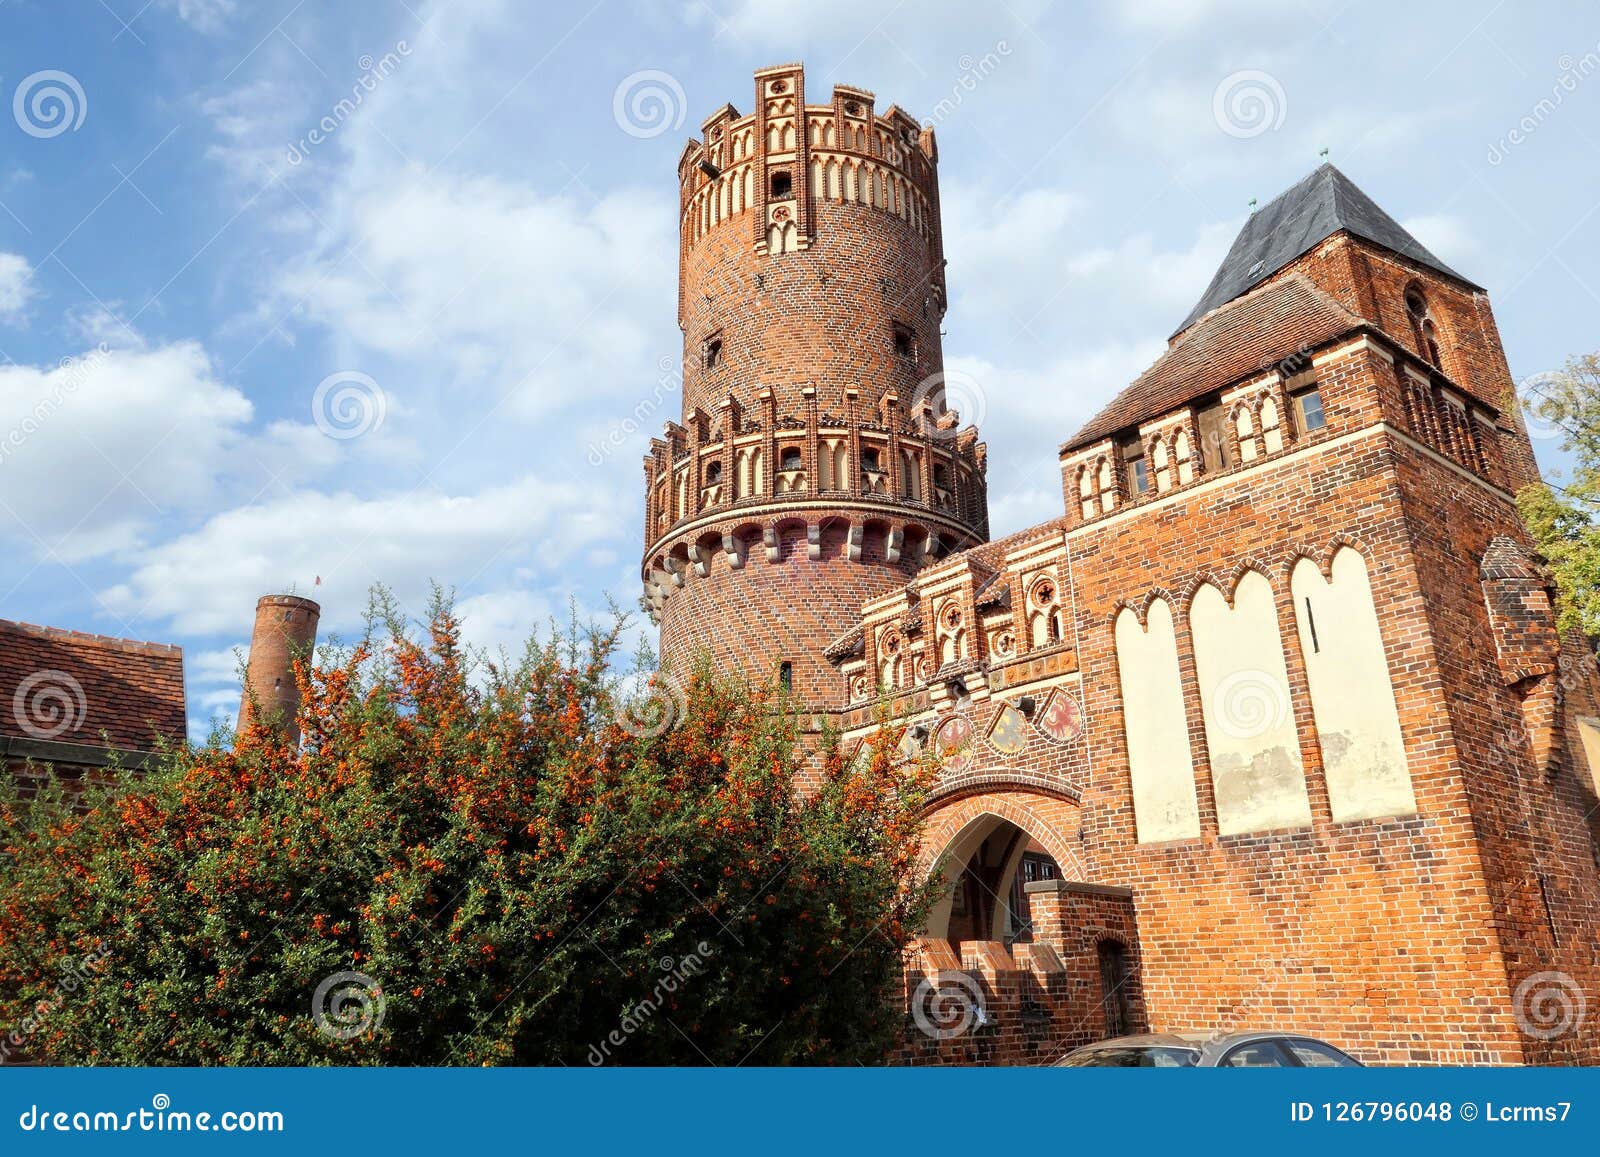 old townwall gate tower of tangermuende germany